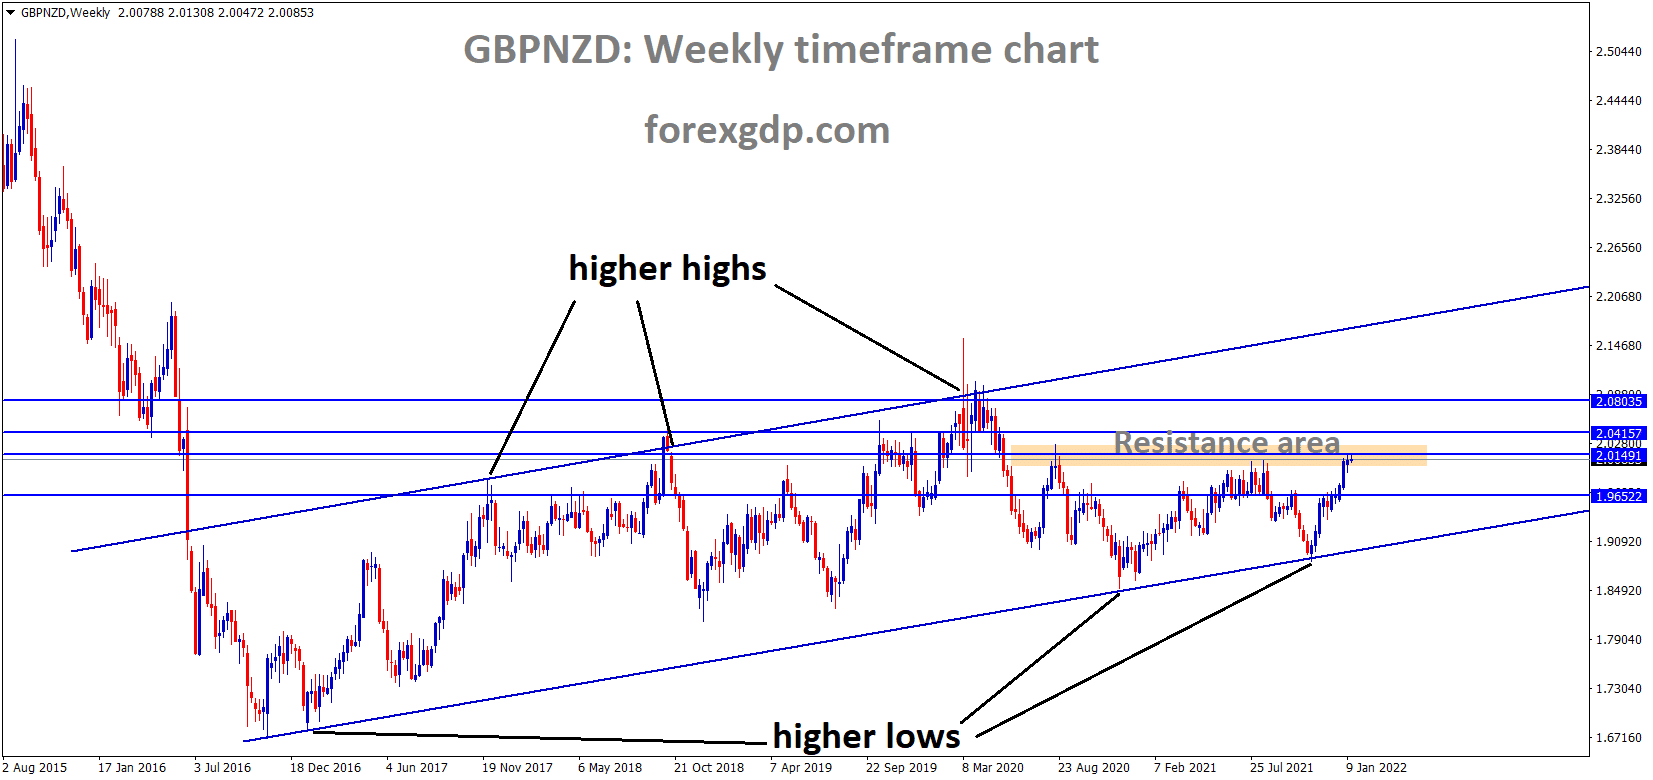 GBPNZD is moving in an Ascending channel and the market has reached the horizontal resistance area of the channel